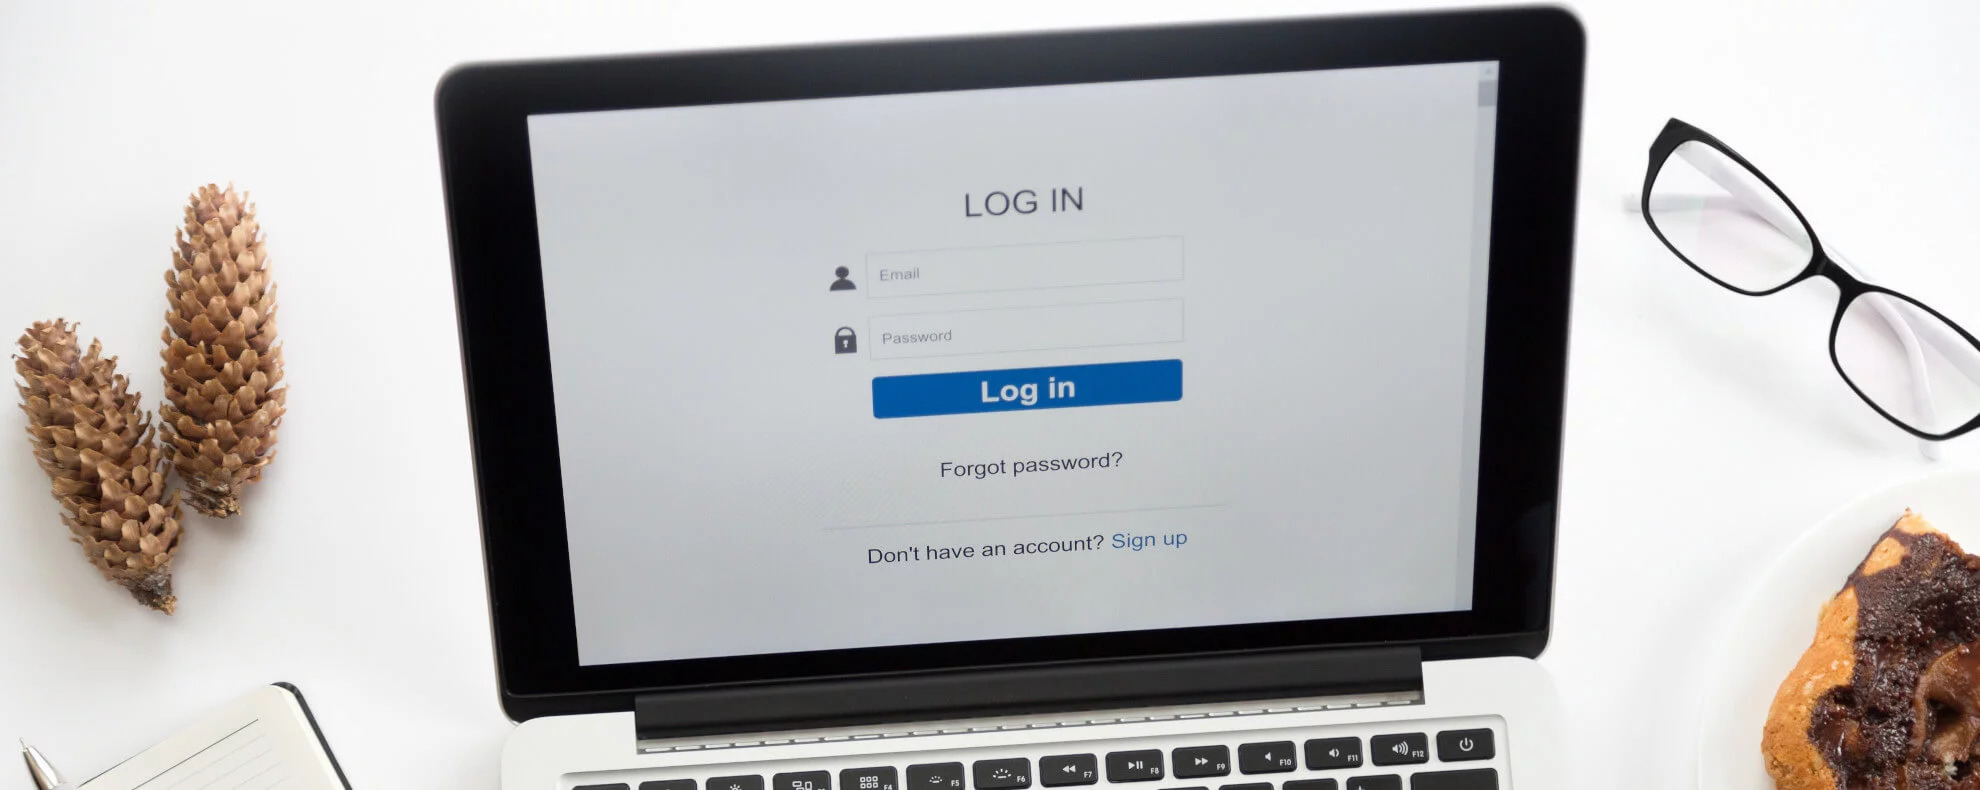 how-to-log-in-google-authenticator